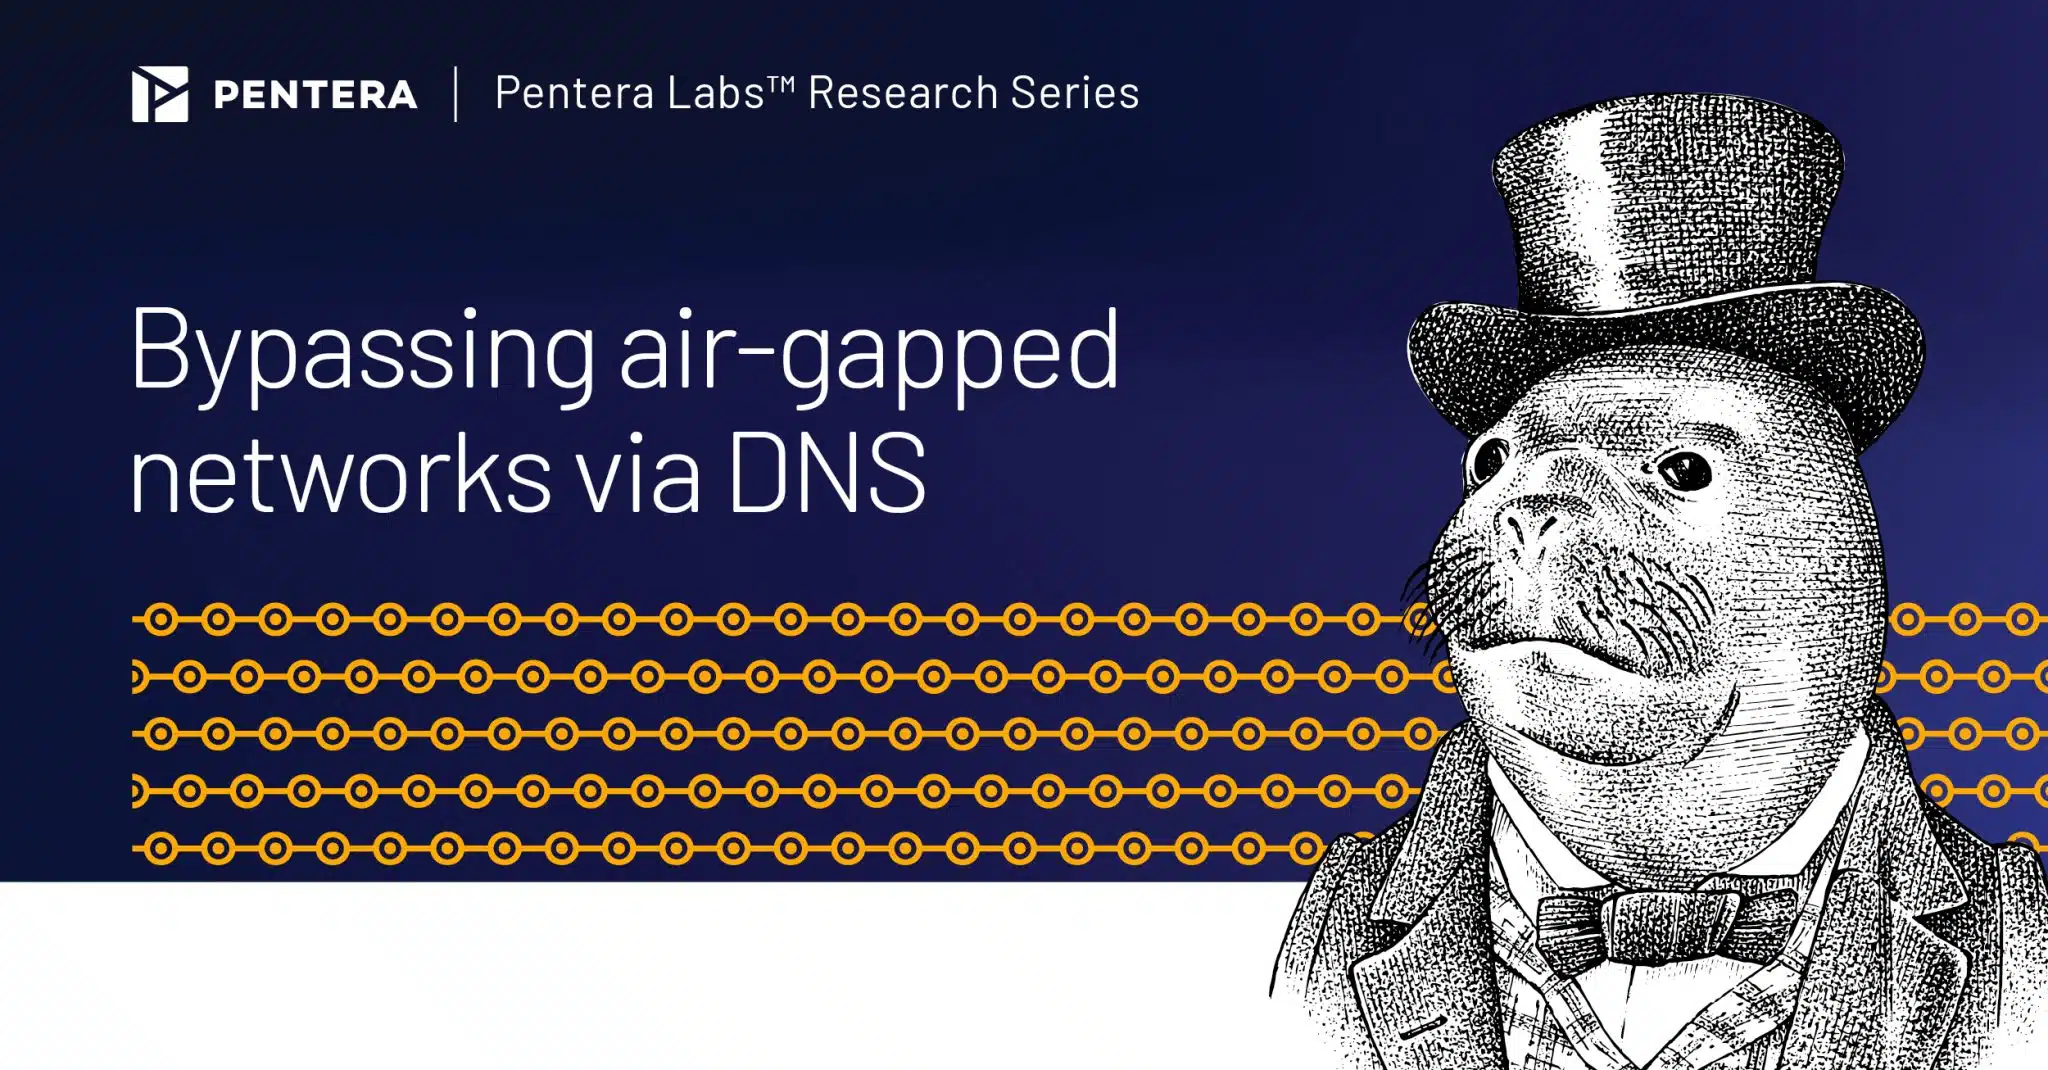 Bypassing “air-gapped” networks via DNS